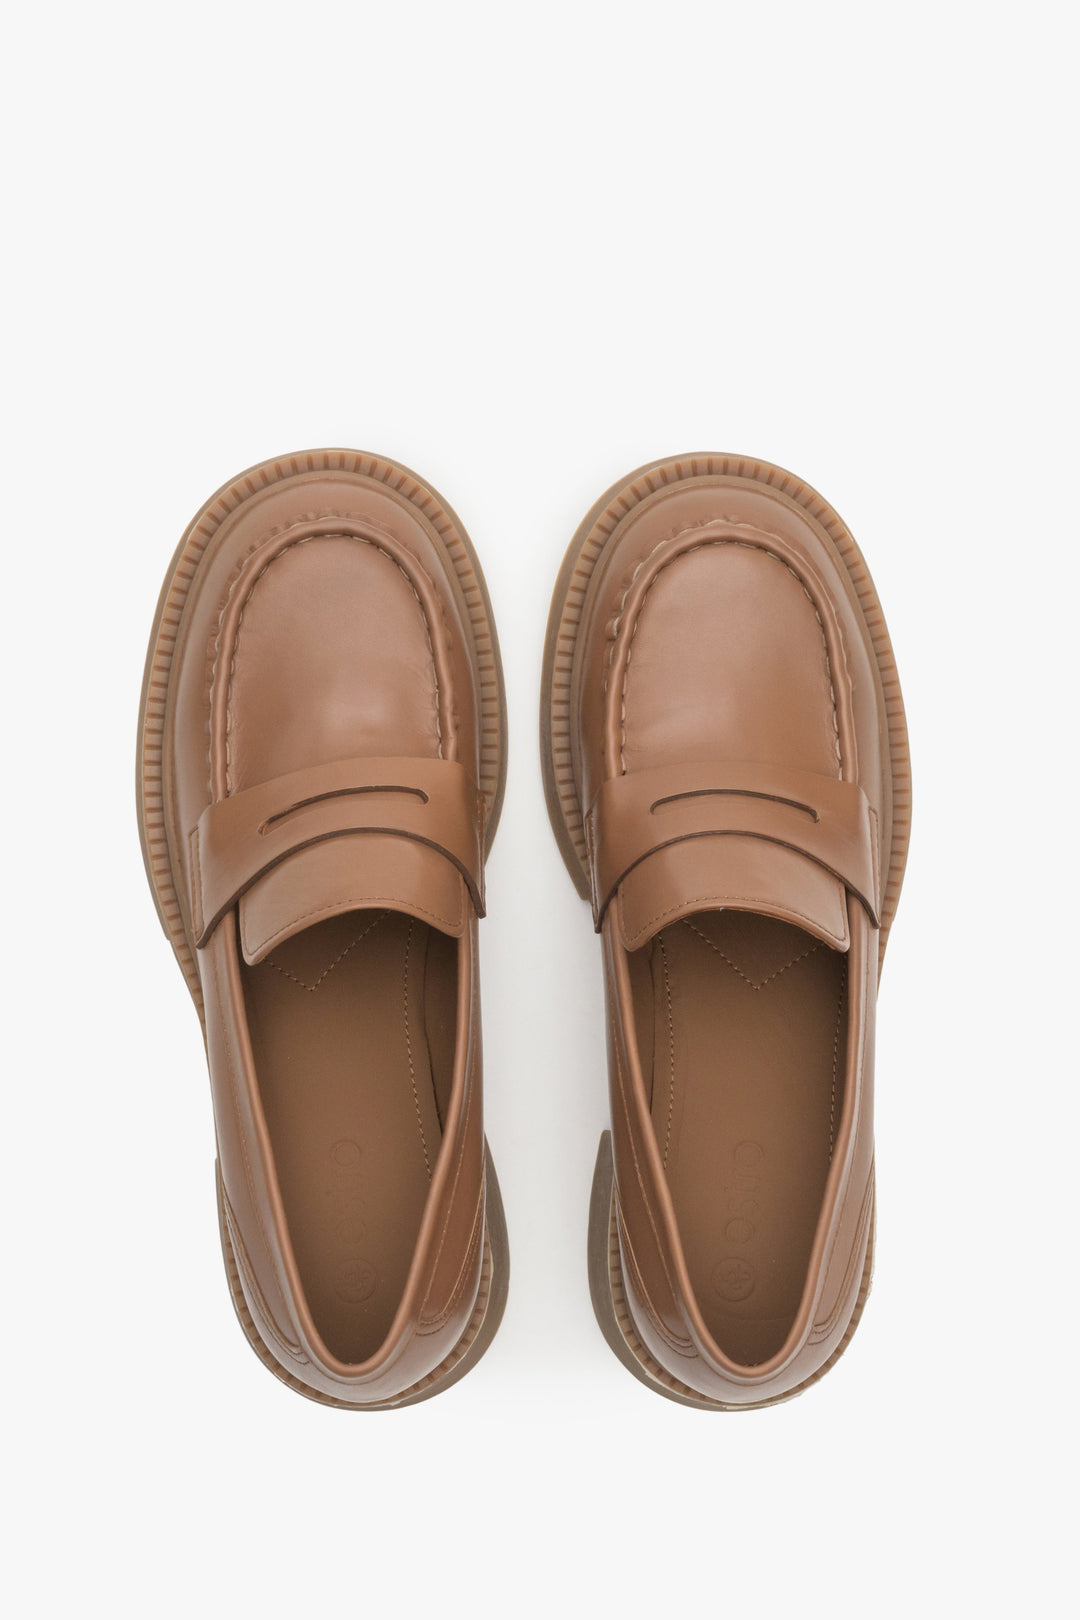 Women's moccasins made of genuine leather in brown by Estro.